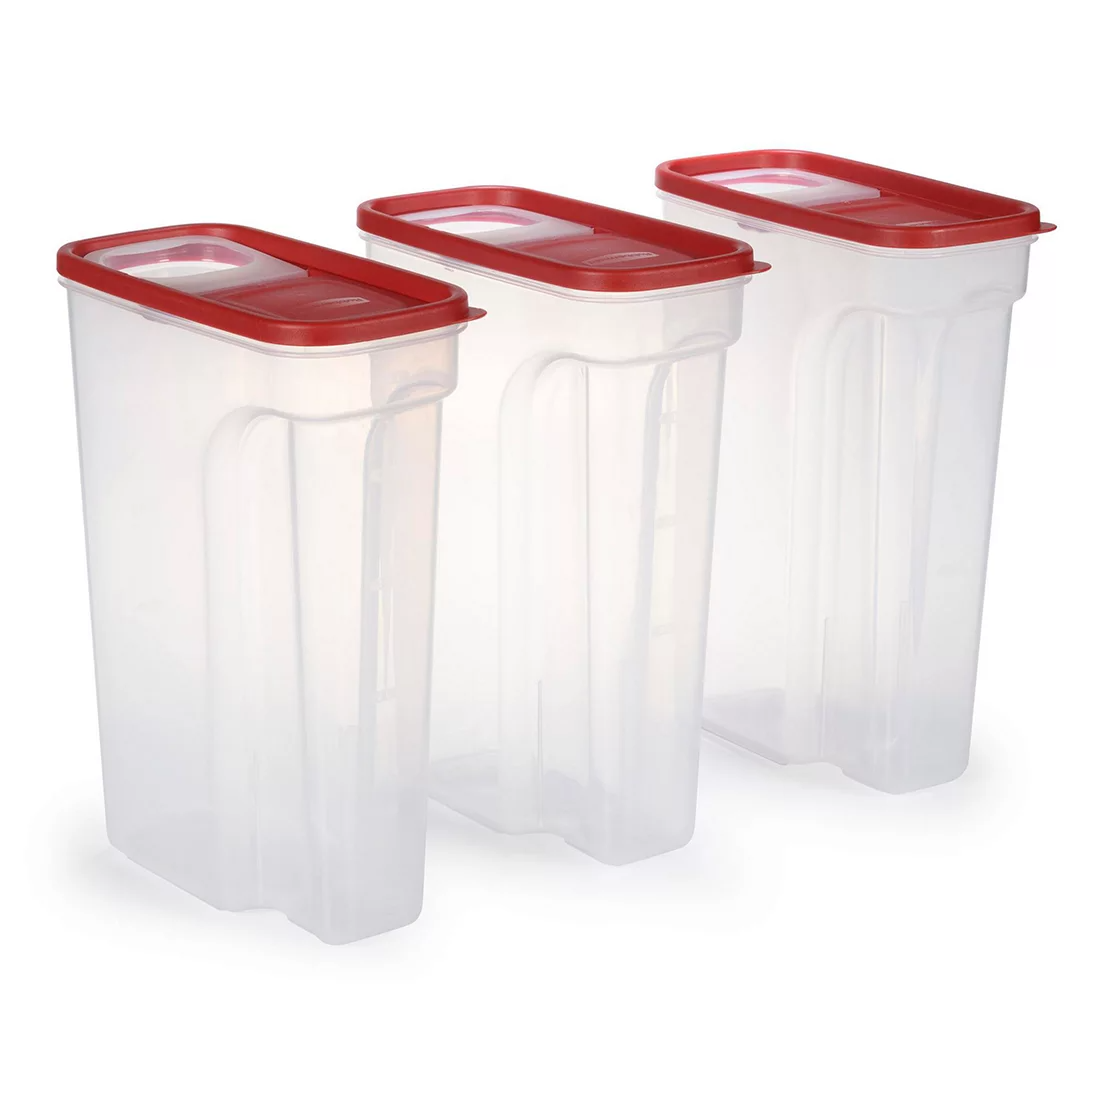 Rubbermaid, Modular Flip-Top Cereal and Food Storage Container, Red, 22 Cup  NEW